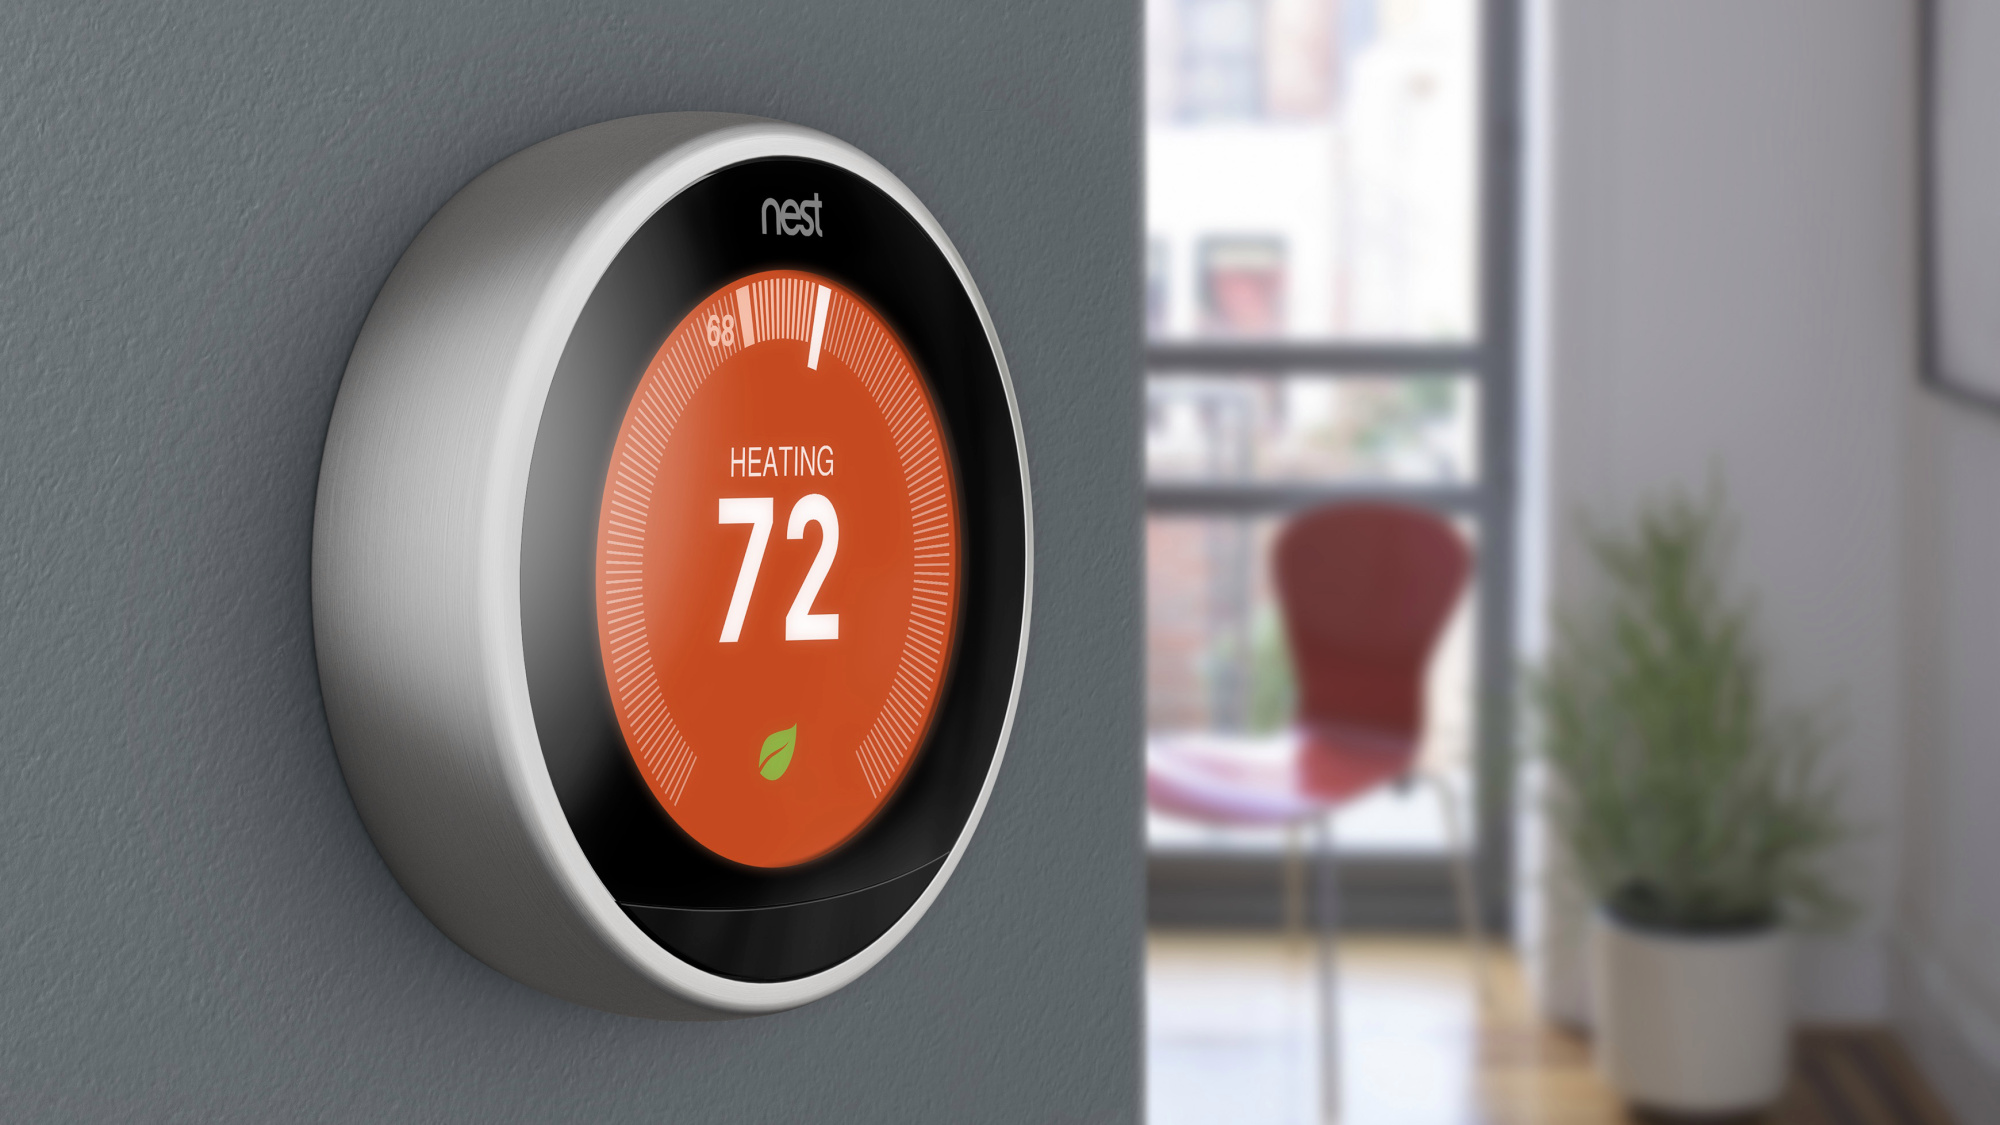 nest-learning-thermostat-3rd-generation